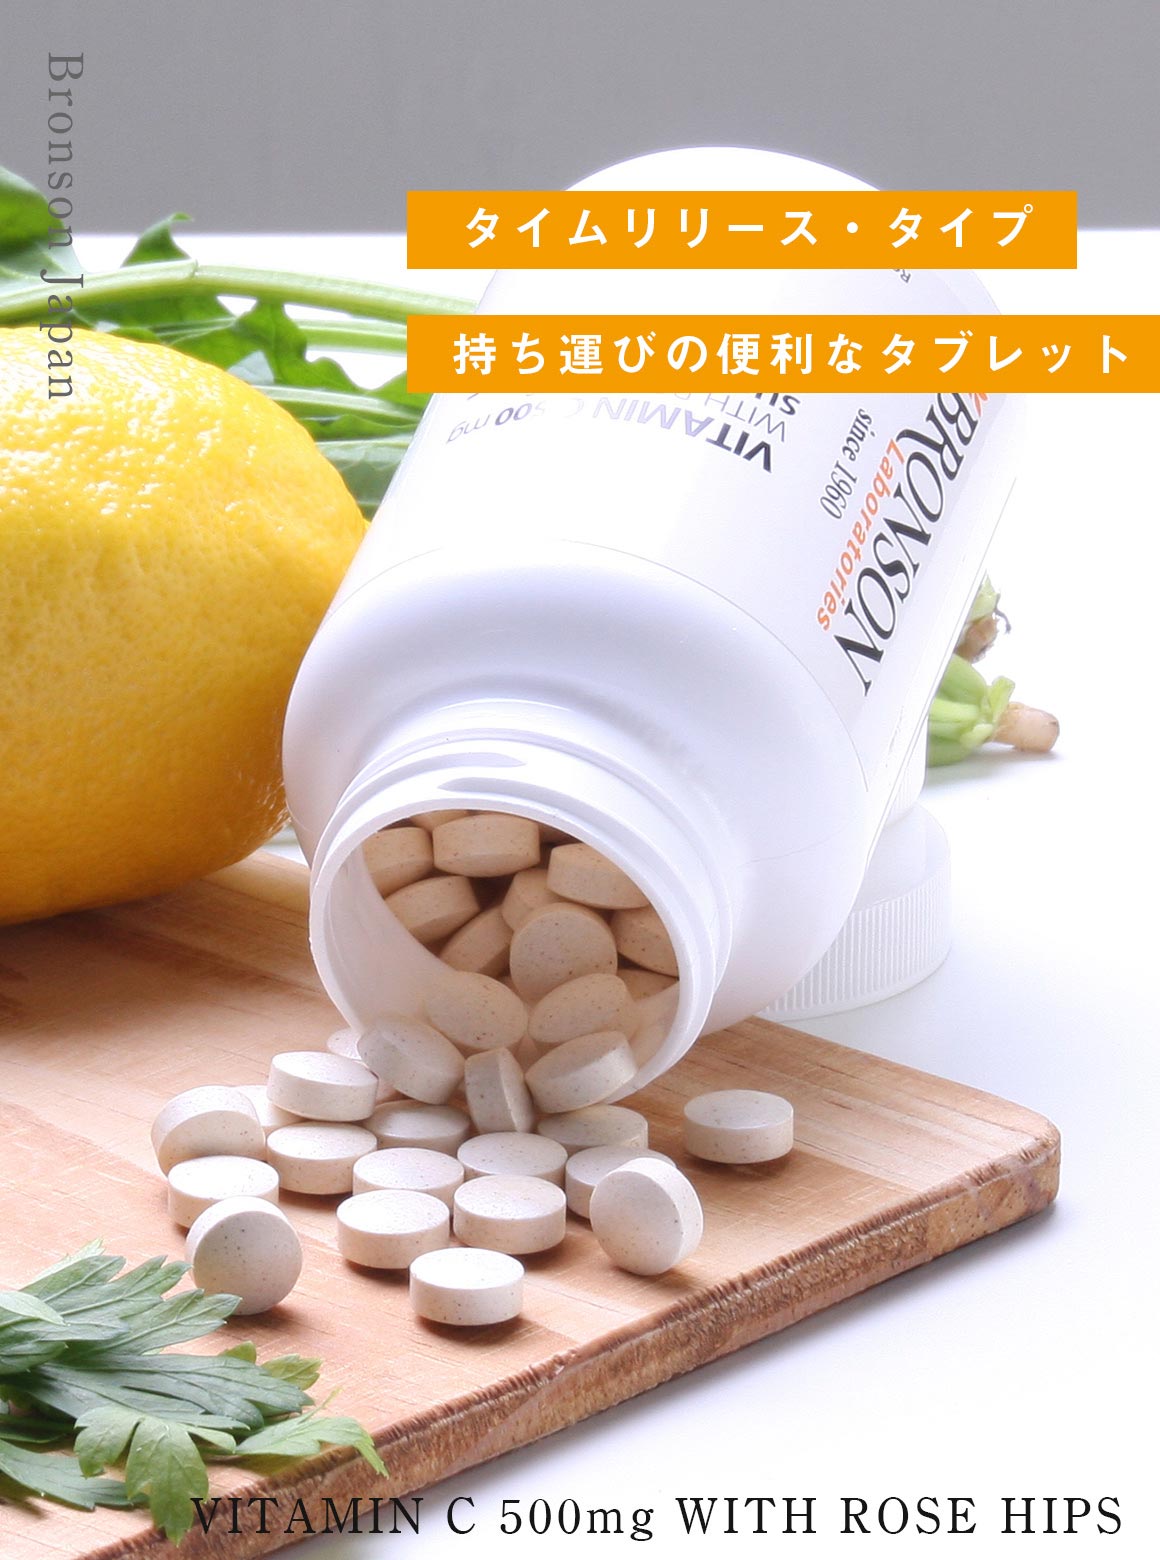 VITAMIN C 500mg WITH ROSE HIPS SUSTAINED RELEASE